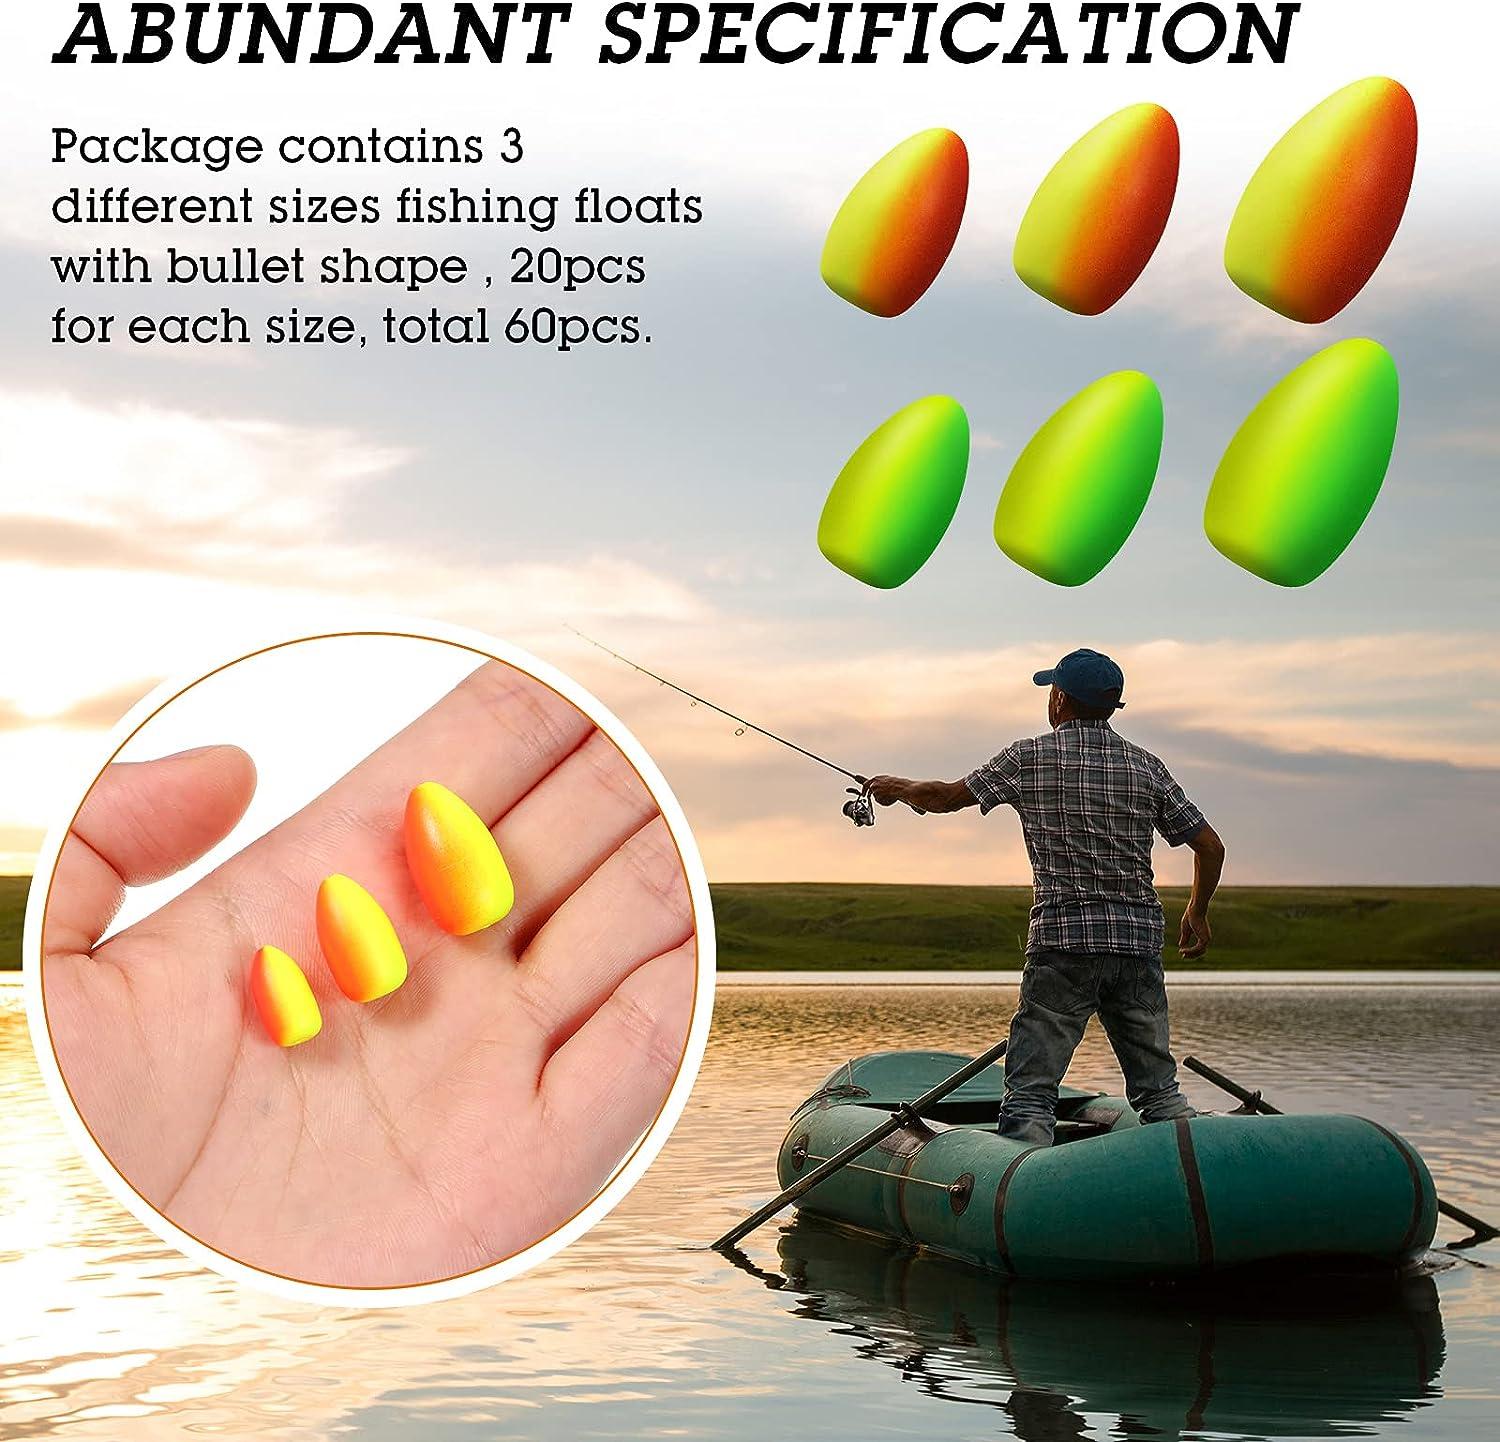  Floats Foam Fishing Rig Floats Pompano Rigs Snell Floats Fly  Fishing Strike Indicators Floats Bright Color Pompano Floats for Trout  Catfish Walleye (100pcs) : Sports & Outdoors